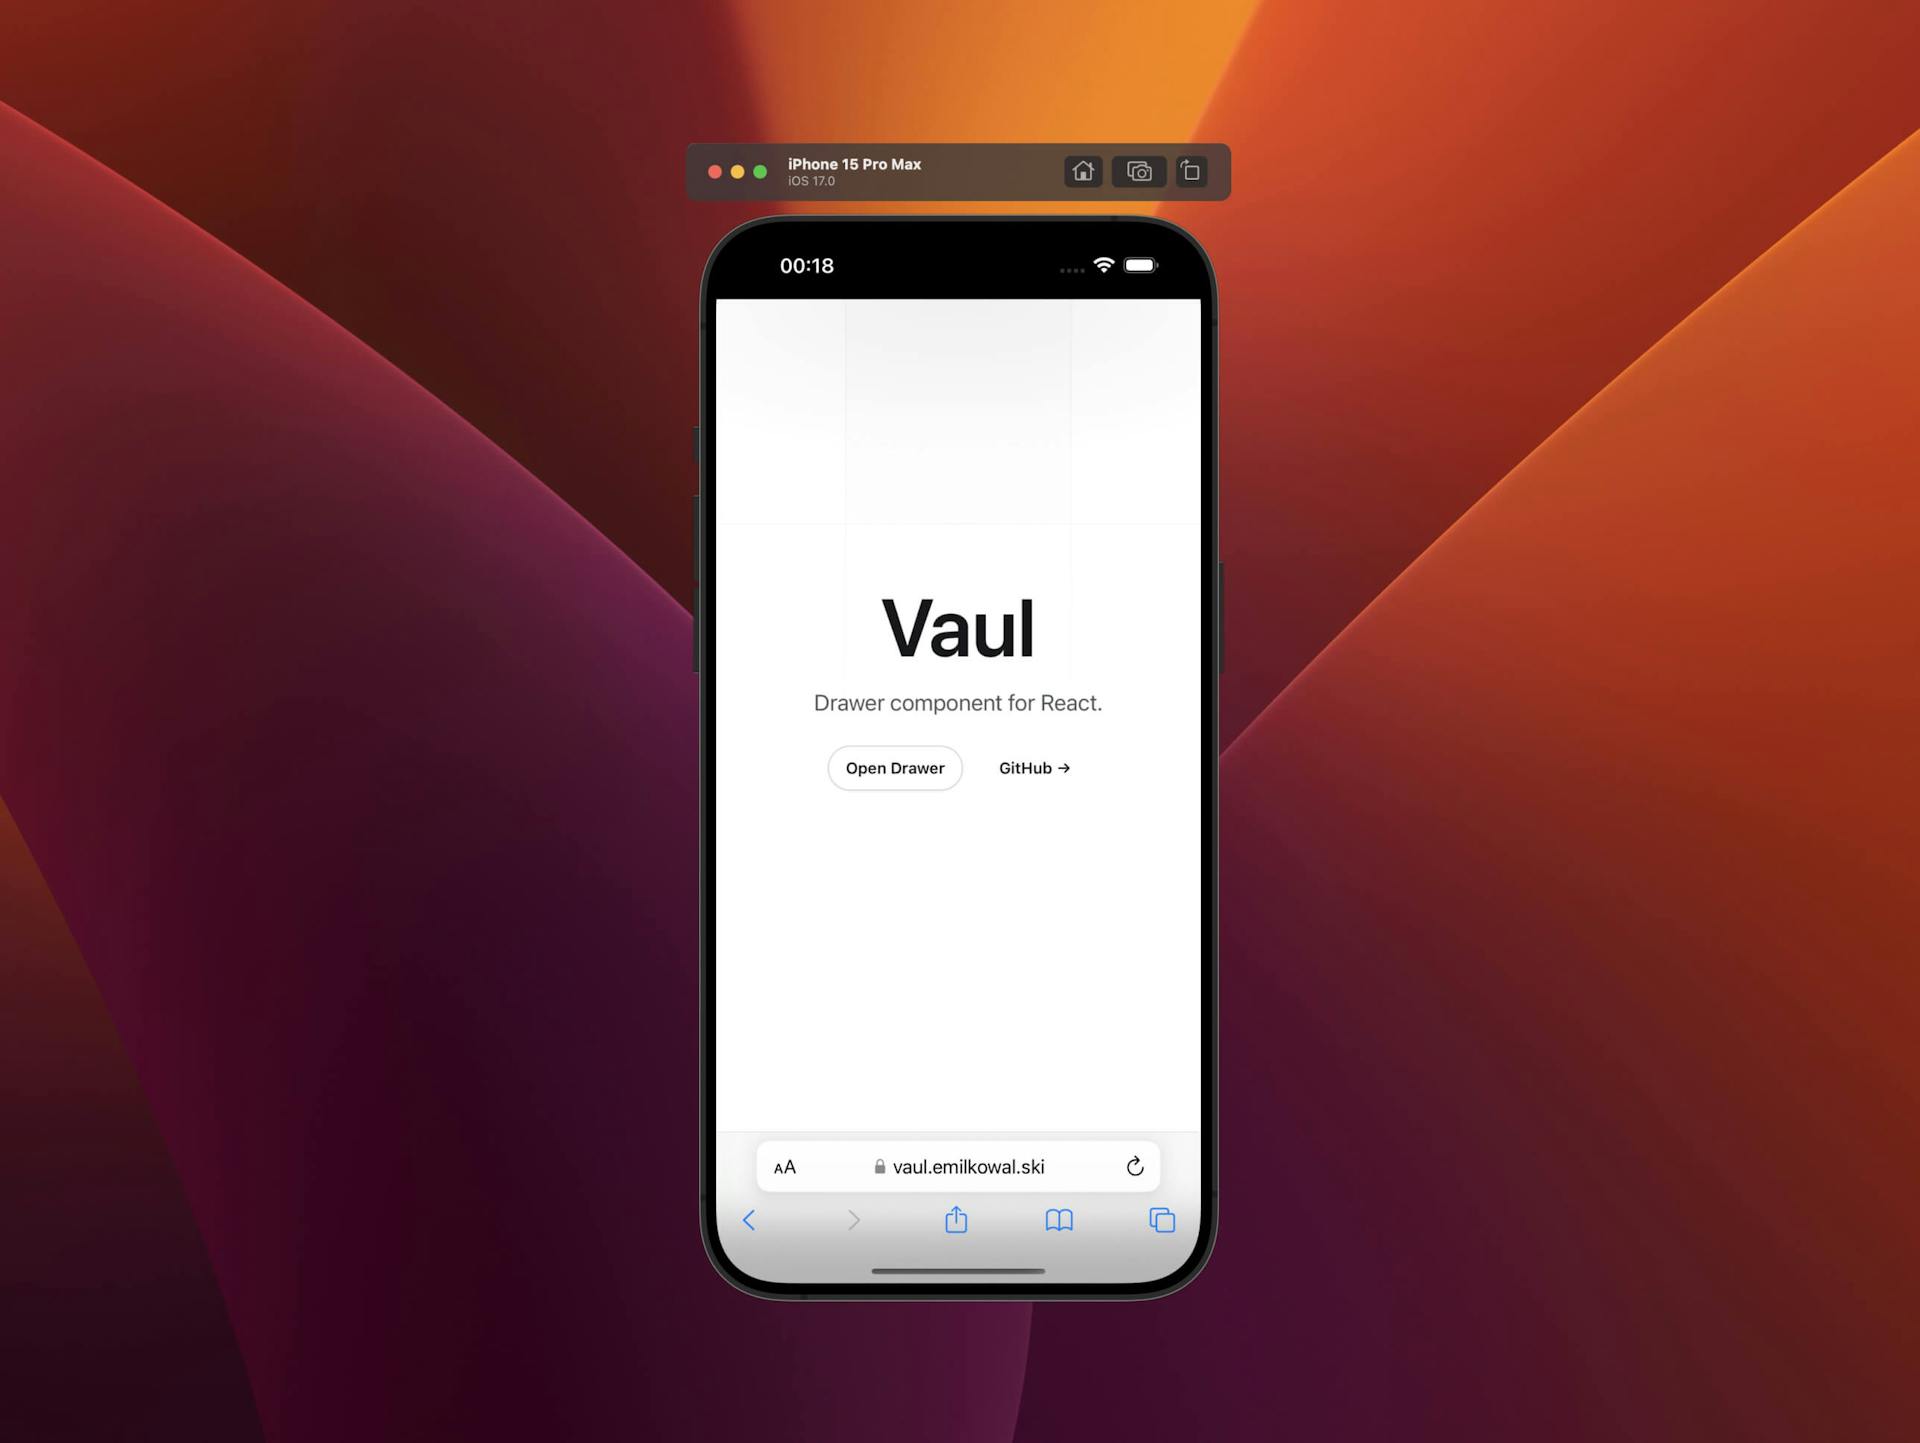 xCode's simulator app with the Vaul site open.